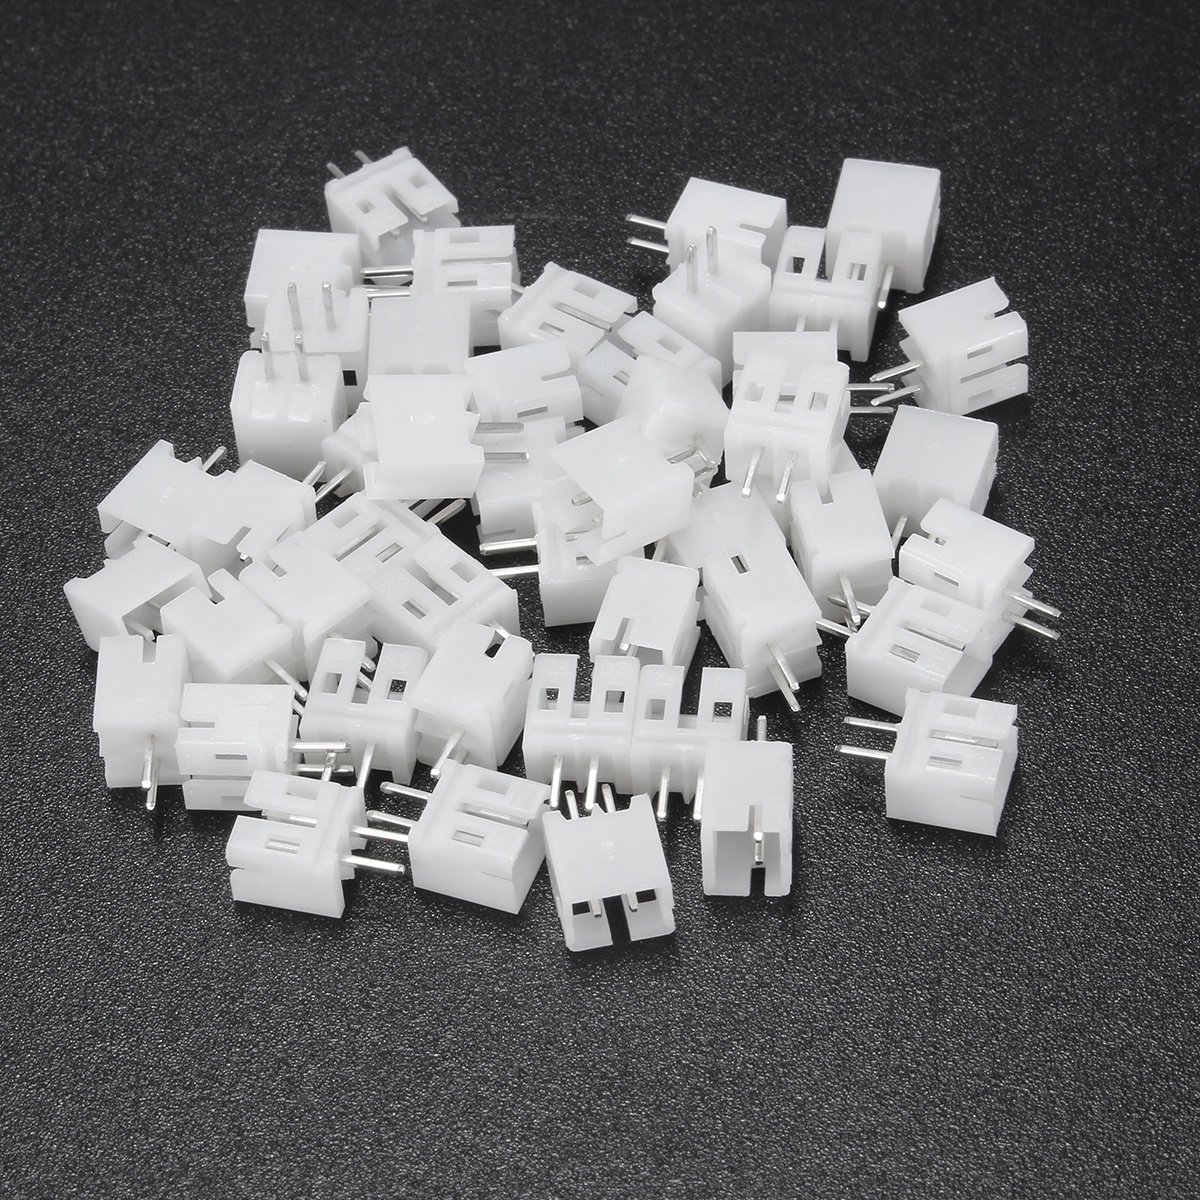 Excellwayreg-100Pcs-Mini-Micro-JST-20-PH-2Pin-Connector-Plug-With-120mm-Wires-Cables-1147298-4